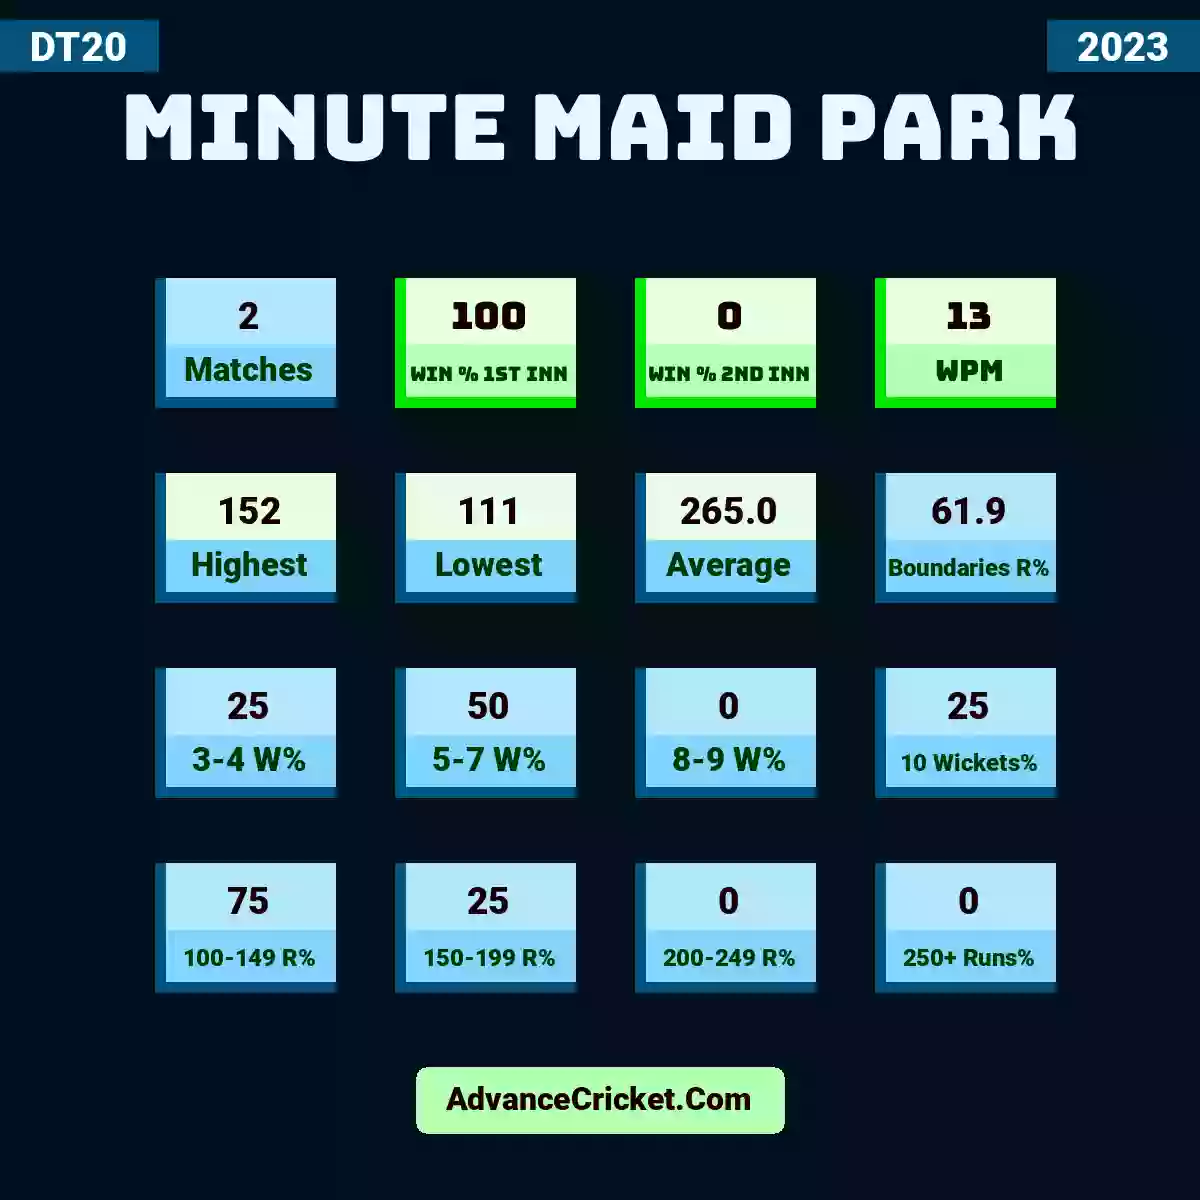 Image showing Minute Maid Park with Matches: 2, Win % 1st Inn: 100, Win % 2nd Inn: 0, WPM: 13, Highest: 152, Lowest: 111, Average: 265.0, Boundaries R%: 61.9, 3-4 W%: 25, 5-7 W%: 50, 8-9 W%: 0, 10 Wickets%: 25, 100-149 R%: 75, 150-199 R%: 25, 200-249 R%: 0, 250+ Runs%: 0.